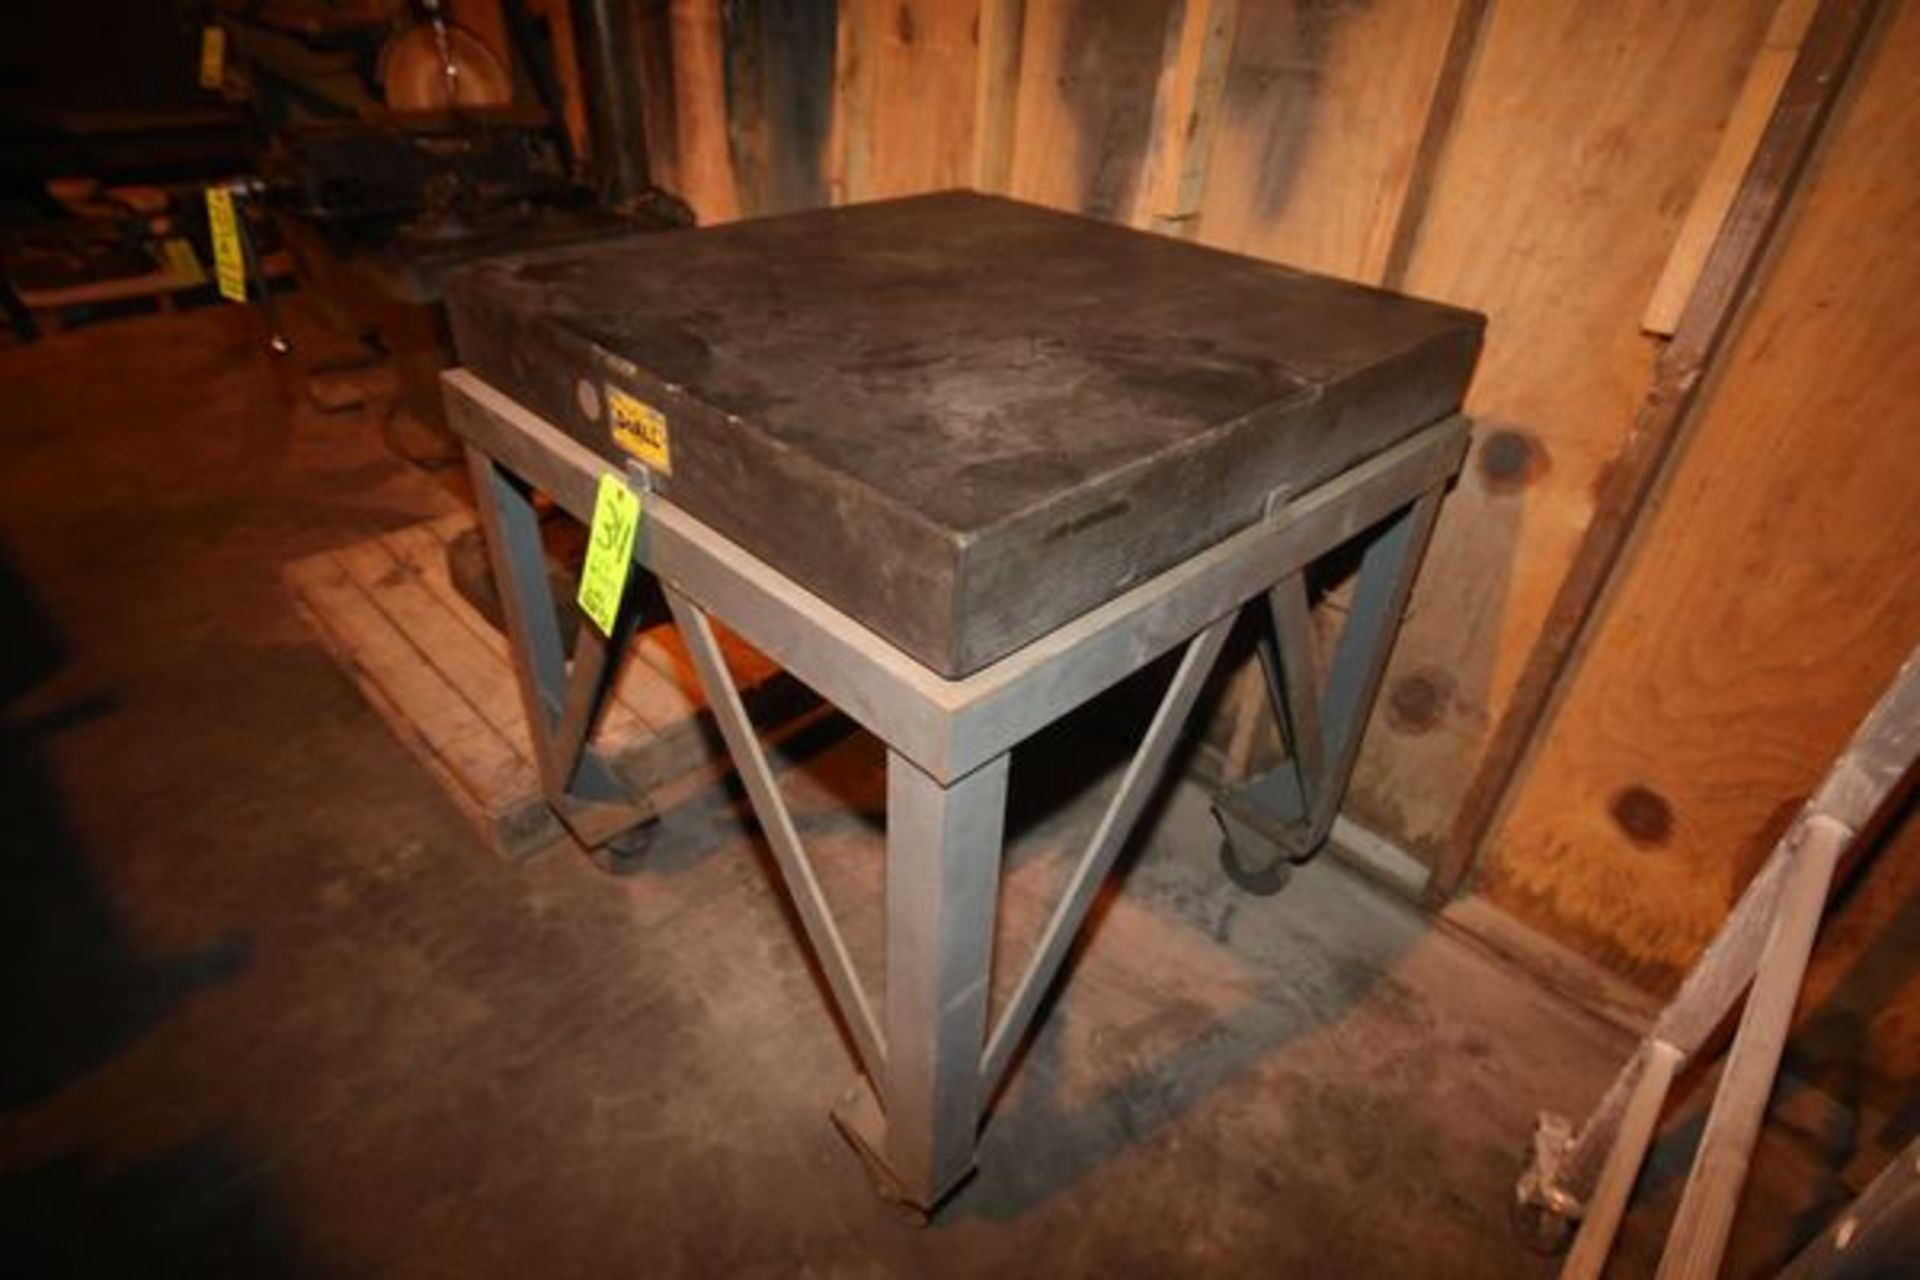 DoAll Aprox. 3' x 3' Granite Table Top, Model 20002, S/N 874-0, Mounted on Portable Cart - Image 2 of 2